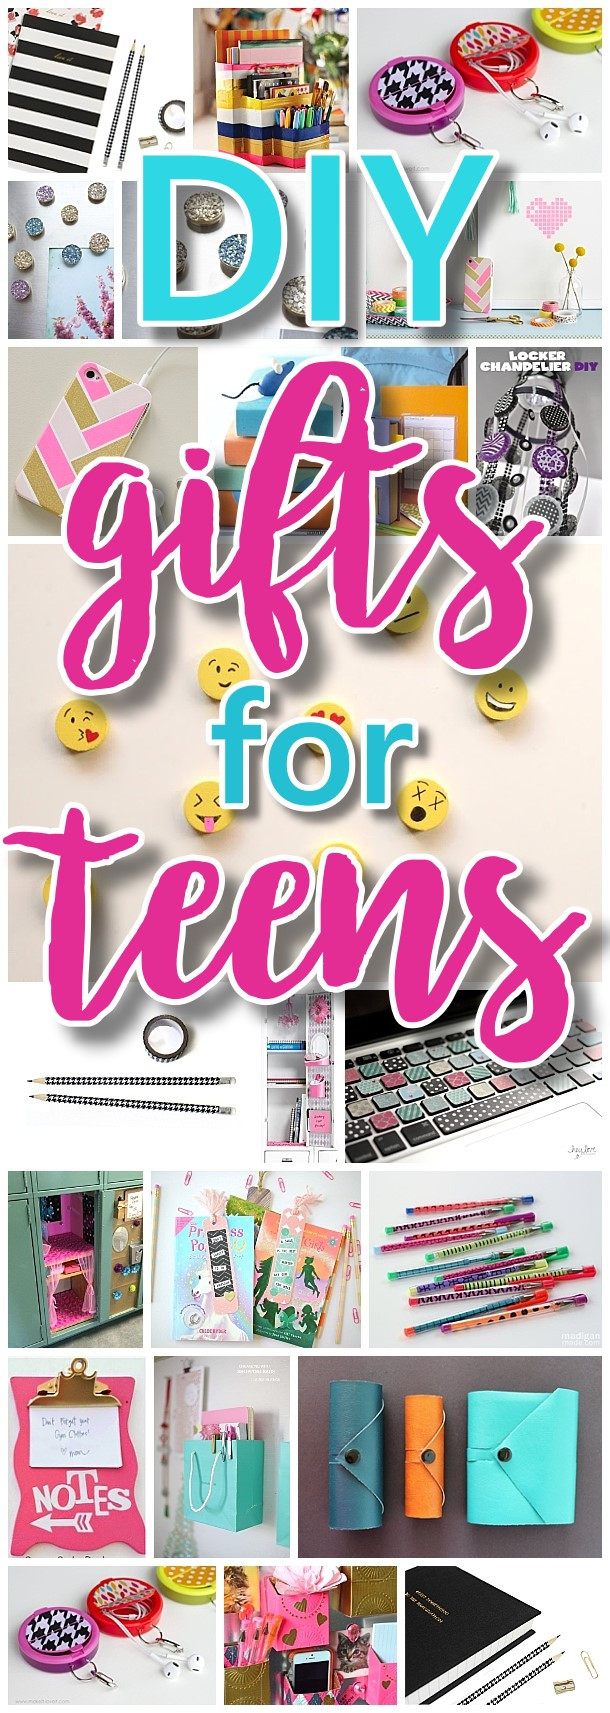 Homemade Gift Ideas For Best Friend
 The BEST DIY Gifts for Teens Tweens and Best Friends